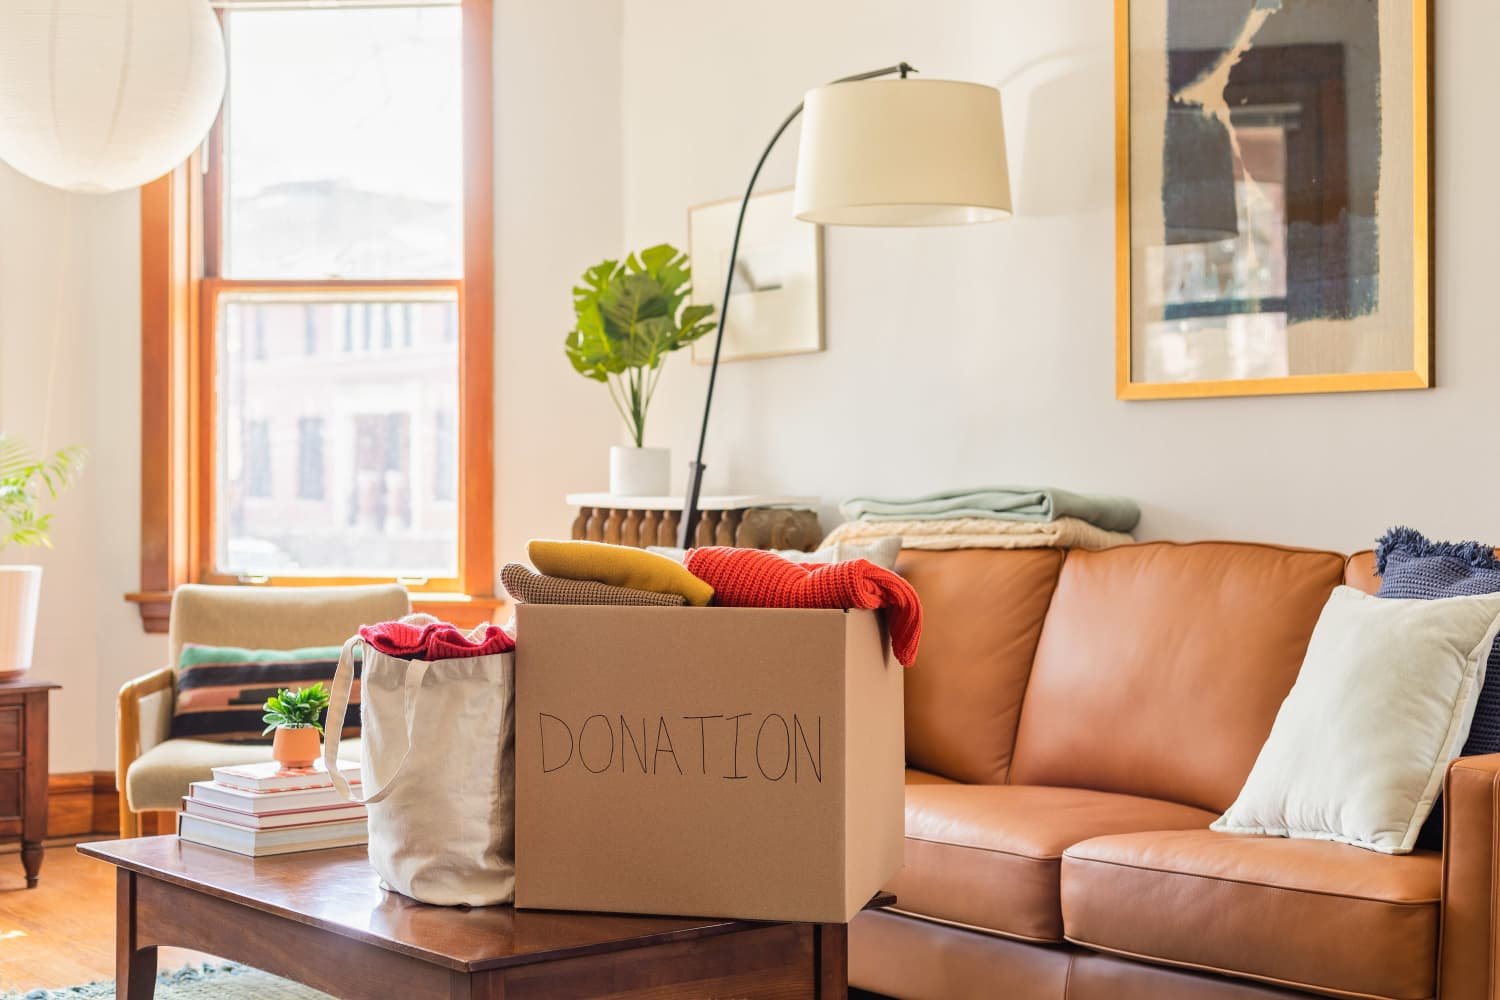 Here’s What to Do With the Stuff You Decluttered (And Maybe Make Some Money)